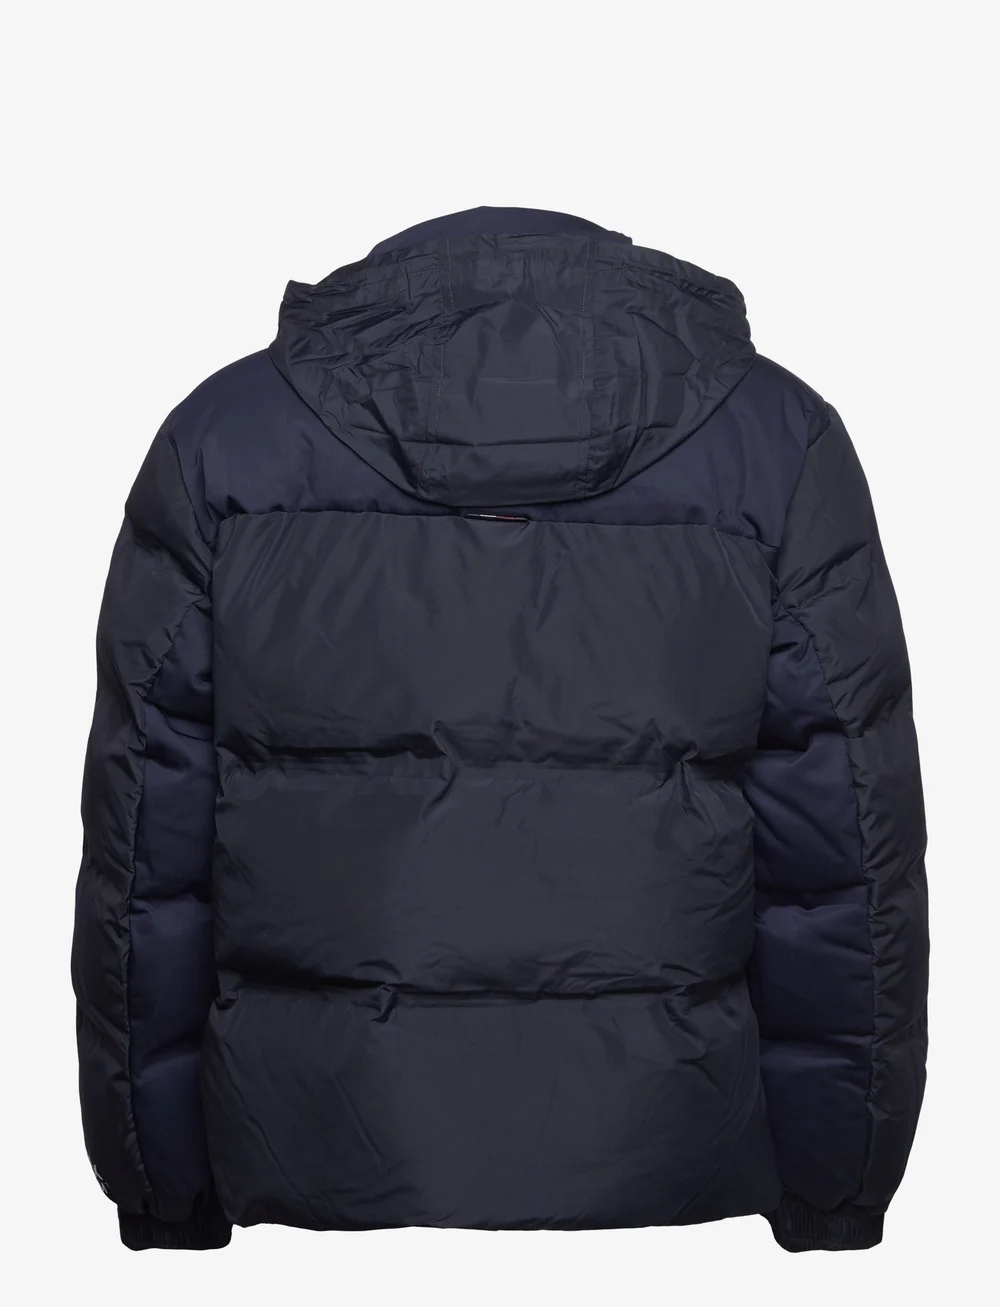 Tommy Hilfiger New York Gore-tex Puffer Jacket - 208.95 €. Buy